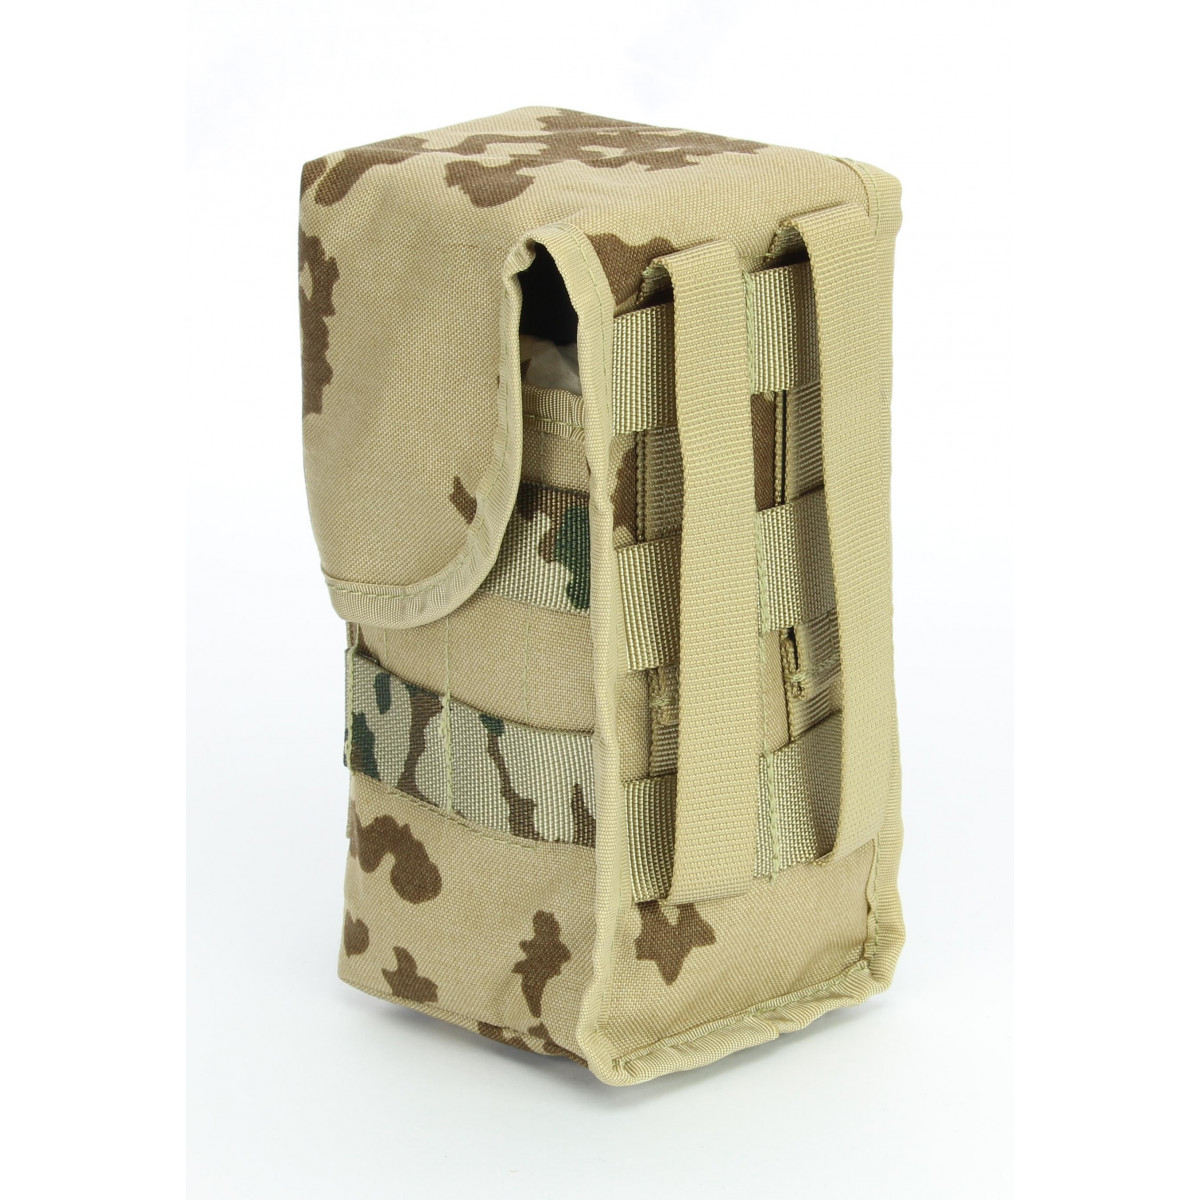 Magazine Pouch Fullcover